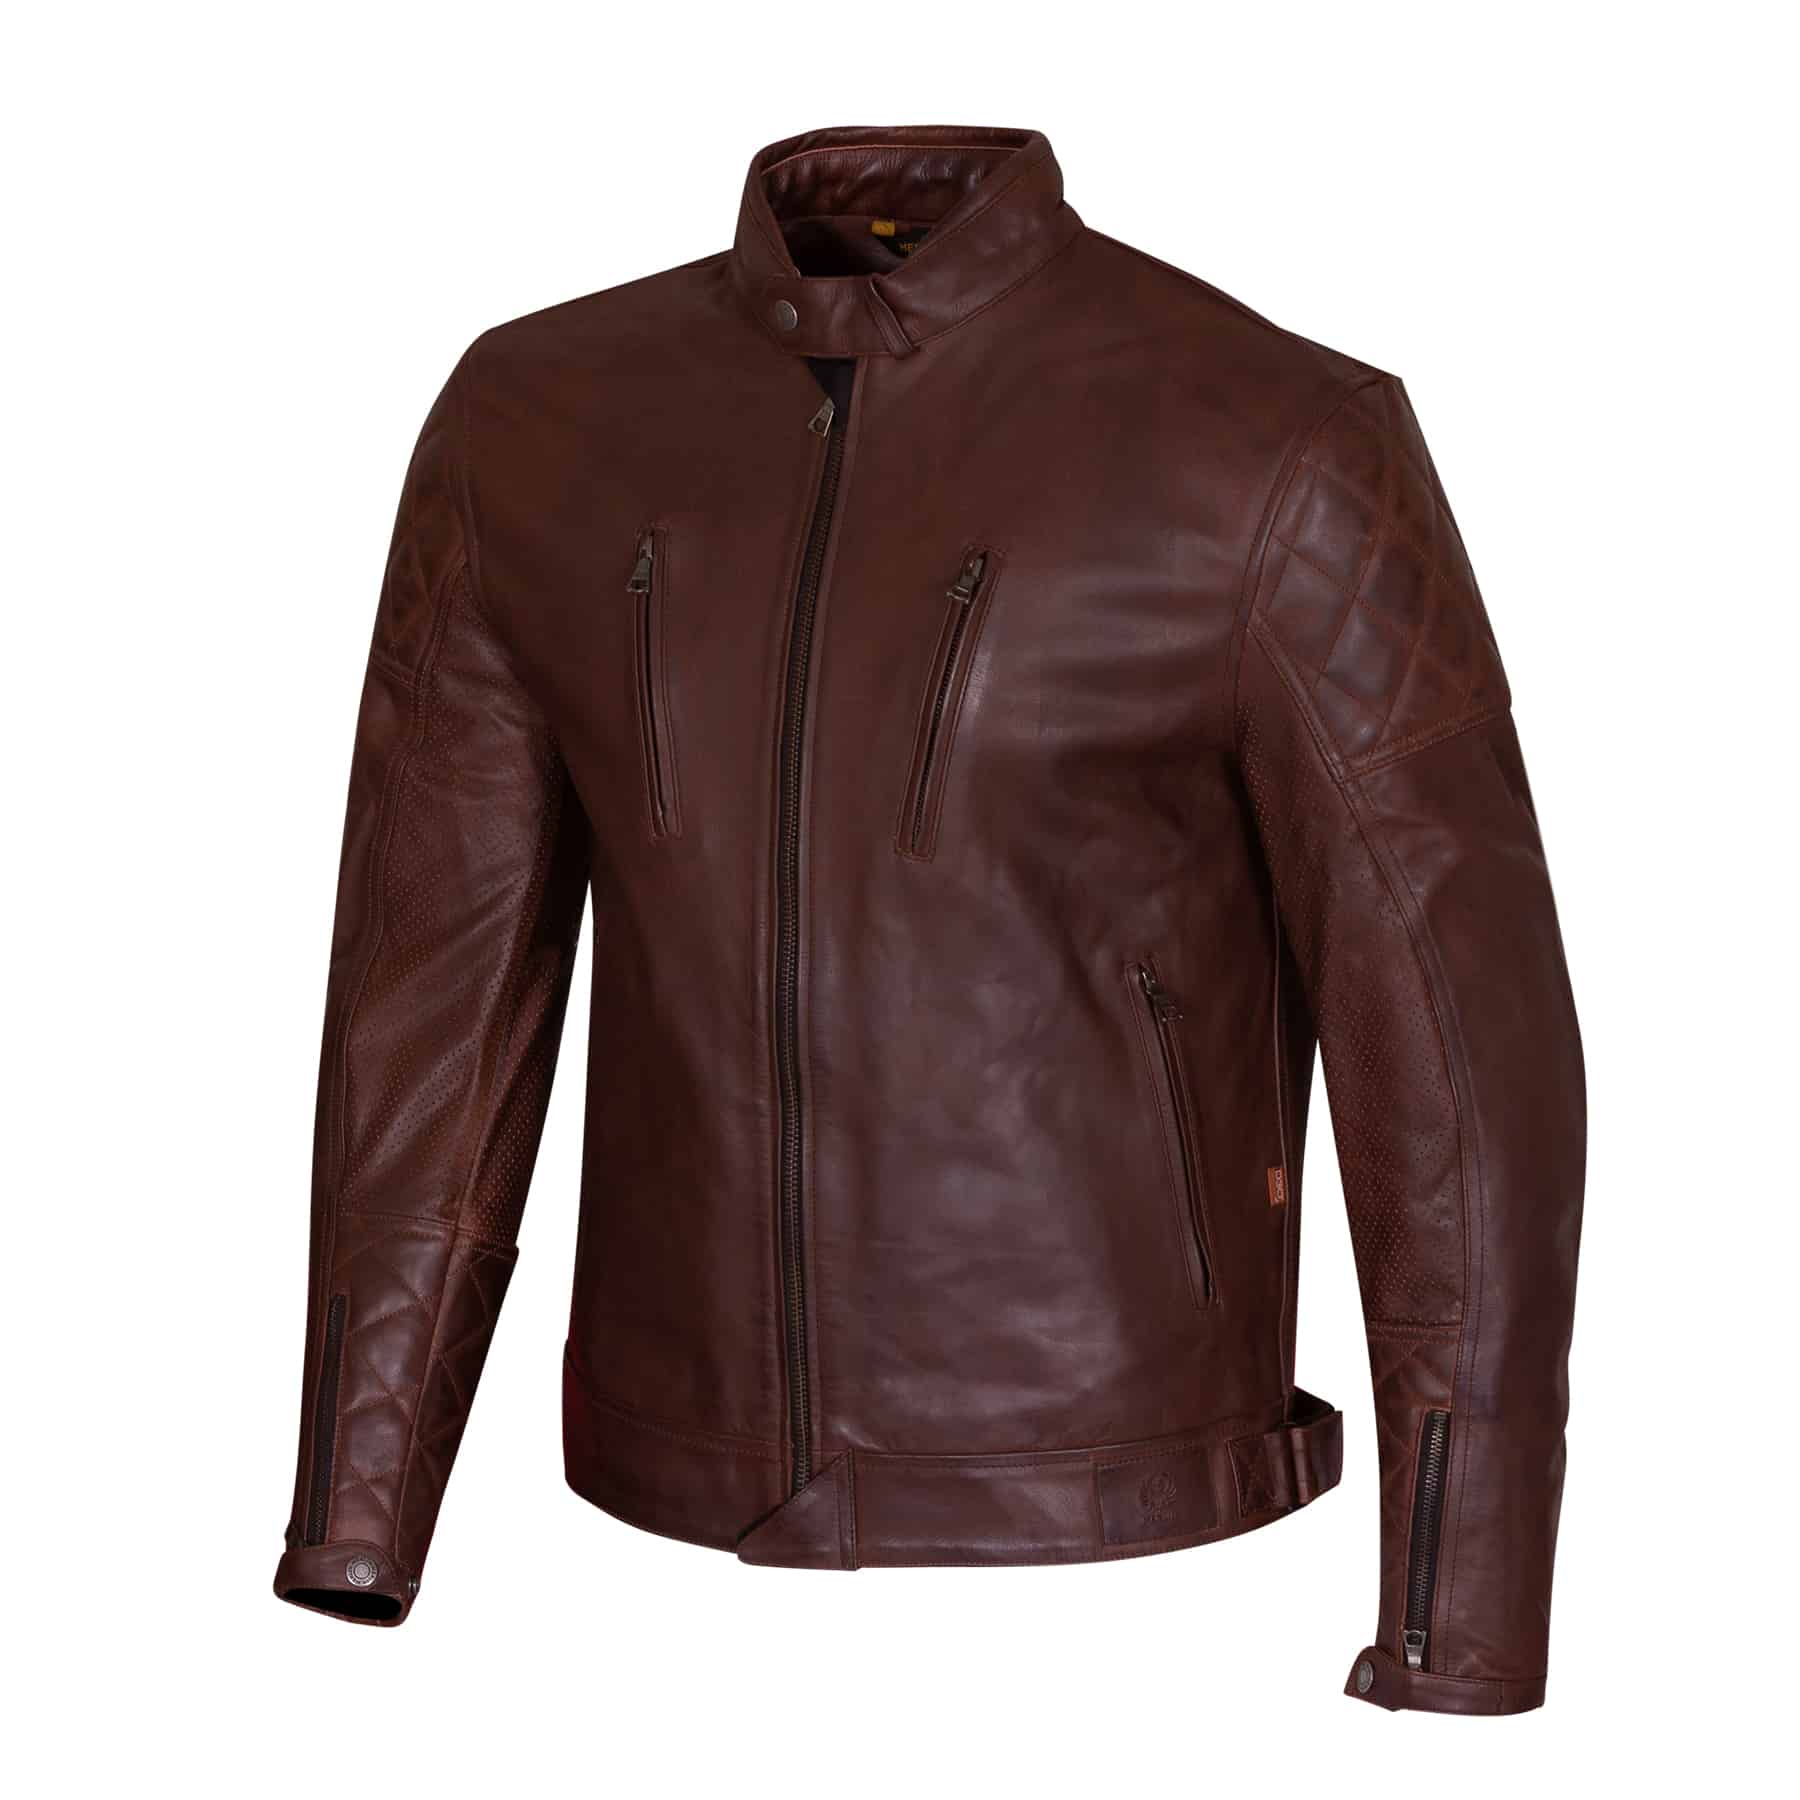 Merlin Wishaw Leather Motorcycle jacket in brown